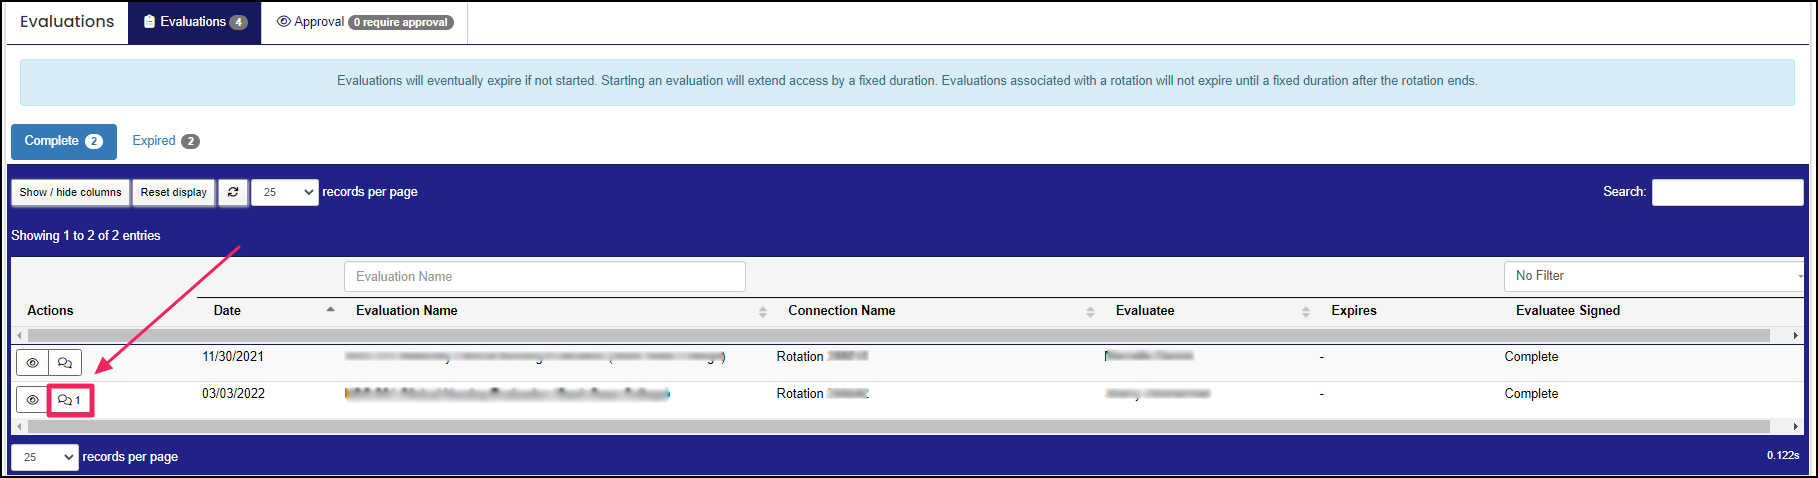 Image shows comments button in evaluations table.